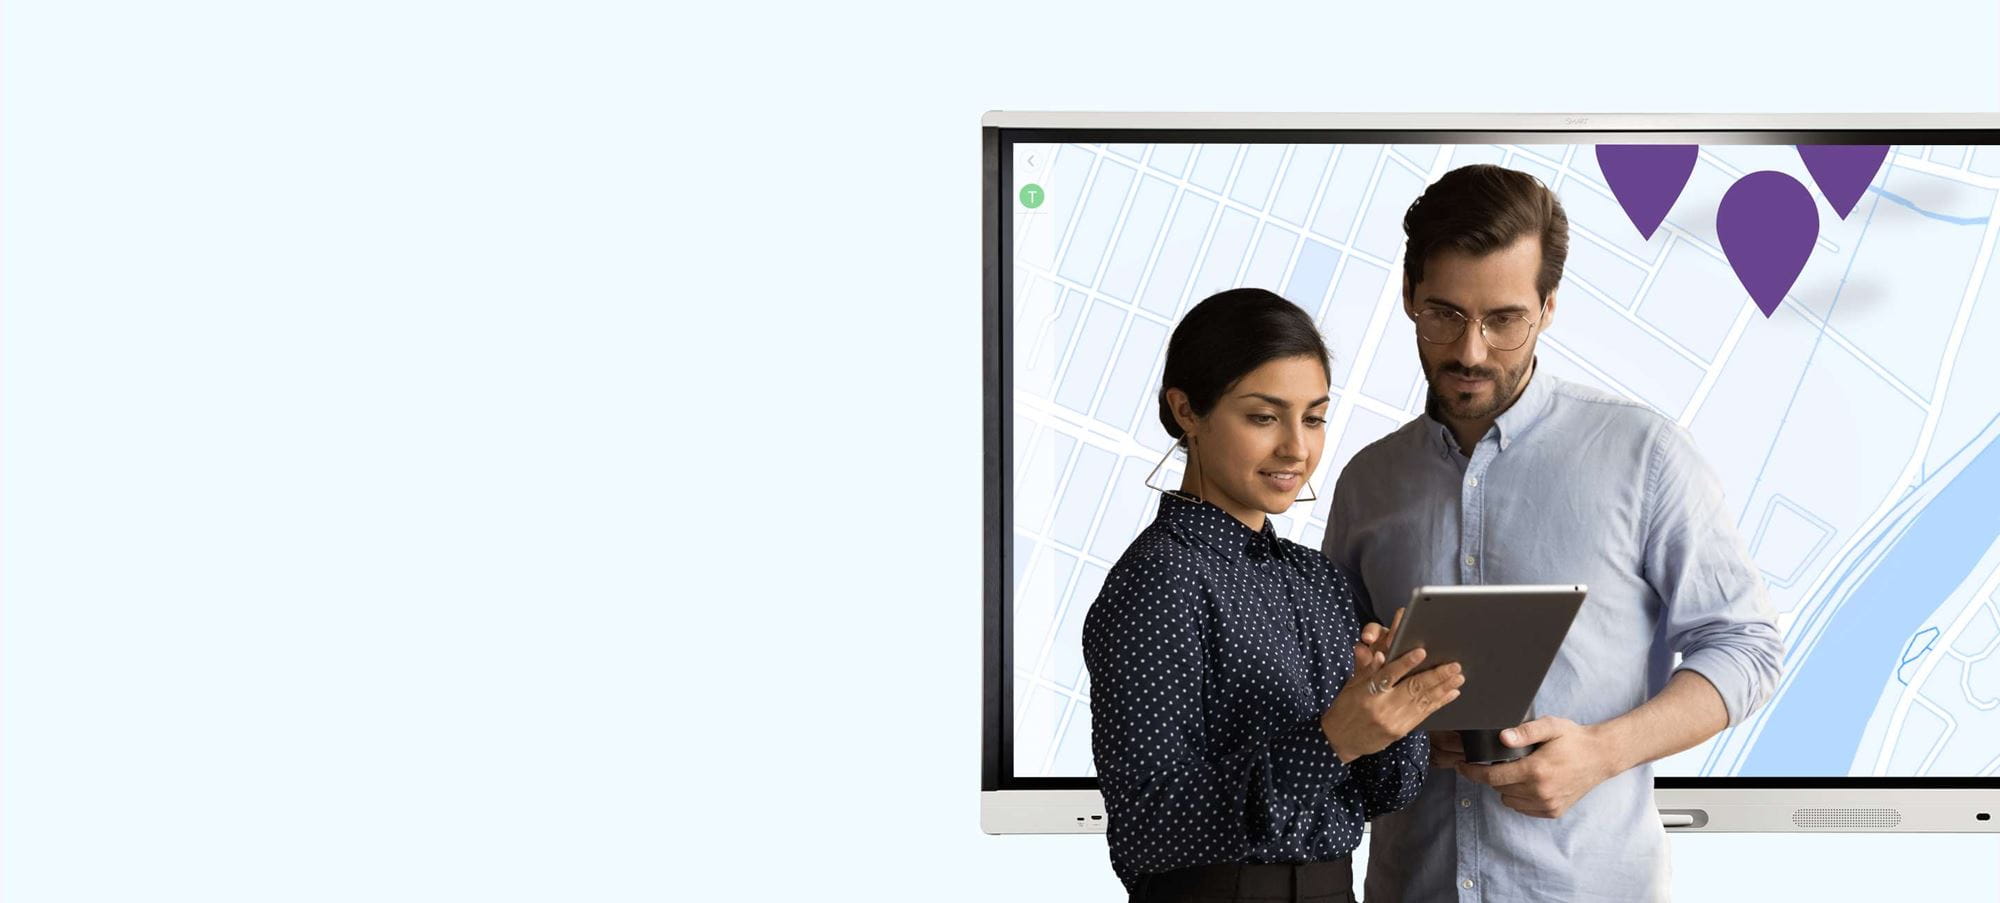 Two colleagues collaborating with a tablet using SMART technology for remote management, with an interactive SMART Board in the background.